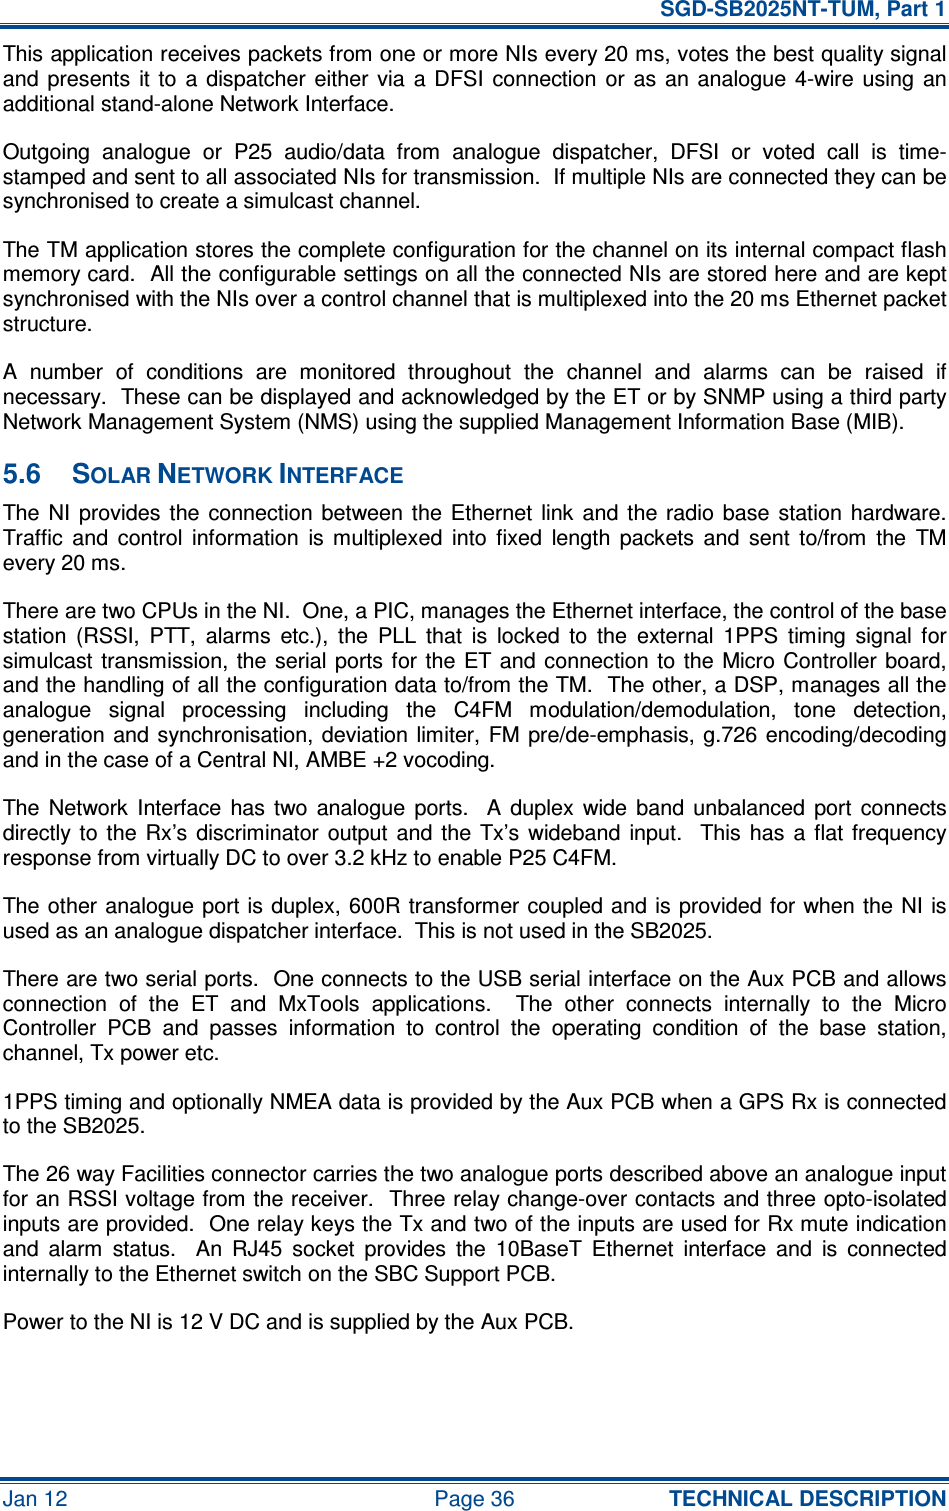   SGD-SB2025NT-TUM, Part 1 Jan 12  Page 36  TECHNICAL DESCRIPTION This application receives packets from one or more NIs every 20 ms, votes the best quality signal and  presents  it  to  a  dispatcher  either  via  a DFSI  connection  or  as  an  analogue  4-wire  using  an additional stand-alone Network Interface. Outgoing  analogue  or  P25  audio/data  from  analogue  dispatcher,  DFSI  or  voted  call  is  time-stamped and sent to all associated NIs for transmission.  If multiple NIs are connected they can be synchronised to create a simulcast channel. The TM application stores the complete configuration for the channel on its internal compact flash memory card.  All the configurable settings on all the connected NIs are stored here and are kept synchronised with the NIs over a control channel that is multiplexed into the 20 ms Ethernet packet structure. A  number  of  conditions  are  monitored  throughout  the  channel  and  alarms  can  be  raised  if necessary.  These can be displayed and acknowledged by the ET or by SNMP using a third party Network Management System (NMS) using the supplied Management Information Base (MIB). 5.6  SOLAR NETWORK INTERFACE The NI  provides  the  connection  between  the  Ethernet  link  and  the radio  base  station  hardware.  Traffic  and  control  information  is  multiplexed  into  fixed  length  packets  and  sent  to/from  the  TM every 20 ms. There are two CPUs in the NI.  One, a PIC, manages the Ethernet interface, the control of the base station  (RSSI,  PTT,  alarms  etc.),  the  PLL  that  is  locked  to  the  external  1PPS  timing  signal  for simulcast transmission,  the serial  ports for  the  ET  and  connection to  the  Micro  Controller  board, and the handling of all the configuration data to/from the TM.  The other, a DSP, manages all the analogue  signal  processing  including  the  C4FM  modulation/demodulation,  tone  detection, generation and synchronisation, deviation limiter,  FM  pre/de-emphasis,  g.726  encoding/decoding and in the case of a Central NI, AMBE +2 vocoding. The  Network  Interface  has  two  analogue  ports.    A  duplex  wide  band  unbalanced  port  connects directly  to  the  Rx’s  discriminator  output and  the Tx’s  wideband  input.    This  has  a  flat  frequency response from virtually DC to over 3.2 kHz to enable P25 C4FM.  The other analogue port is duplex, 600R  transformer coupled and is  provided for when the  NI  is used as an analogue dispatcher interface.  This is not used in the SB2025. There are two serial ports.  One connects to the USB serial interface on the Aux PCB and allows connection  of  the  ET  and  MxTools  applications.    The  other  connects  internally  to  the  Micro Controller  PCB  and  passes  information  to  control  the  operating  condition  of  the  base  station, channel, Tx power etc. 1PPS timing and optionally NMEA data is provided by the Aux PCB when a GPS Rx is connected to the SB2025. The 26 way Facilities connector carries the two analogue ports described above an analogue input for an RSSI voltage from the receiver.  Three relay change-over contacts and three opto-isolated inputs are provided.  One relay keys the Tx and two of the inputs are used for Rx mute indication and  alarm  status.    An  RJ45  socket  provides  the  10BaseT  Ethernet  interface  and  is  connected internally to the Ethernet switch on the SBC Support PCB. Power to the NI is 12 V DC and is supplied by the Aux PCB.  